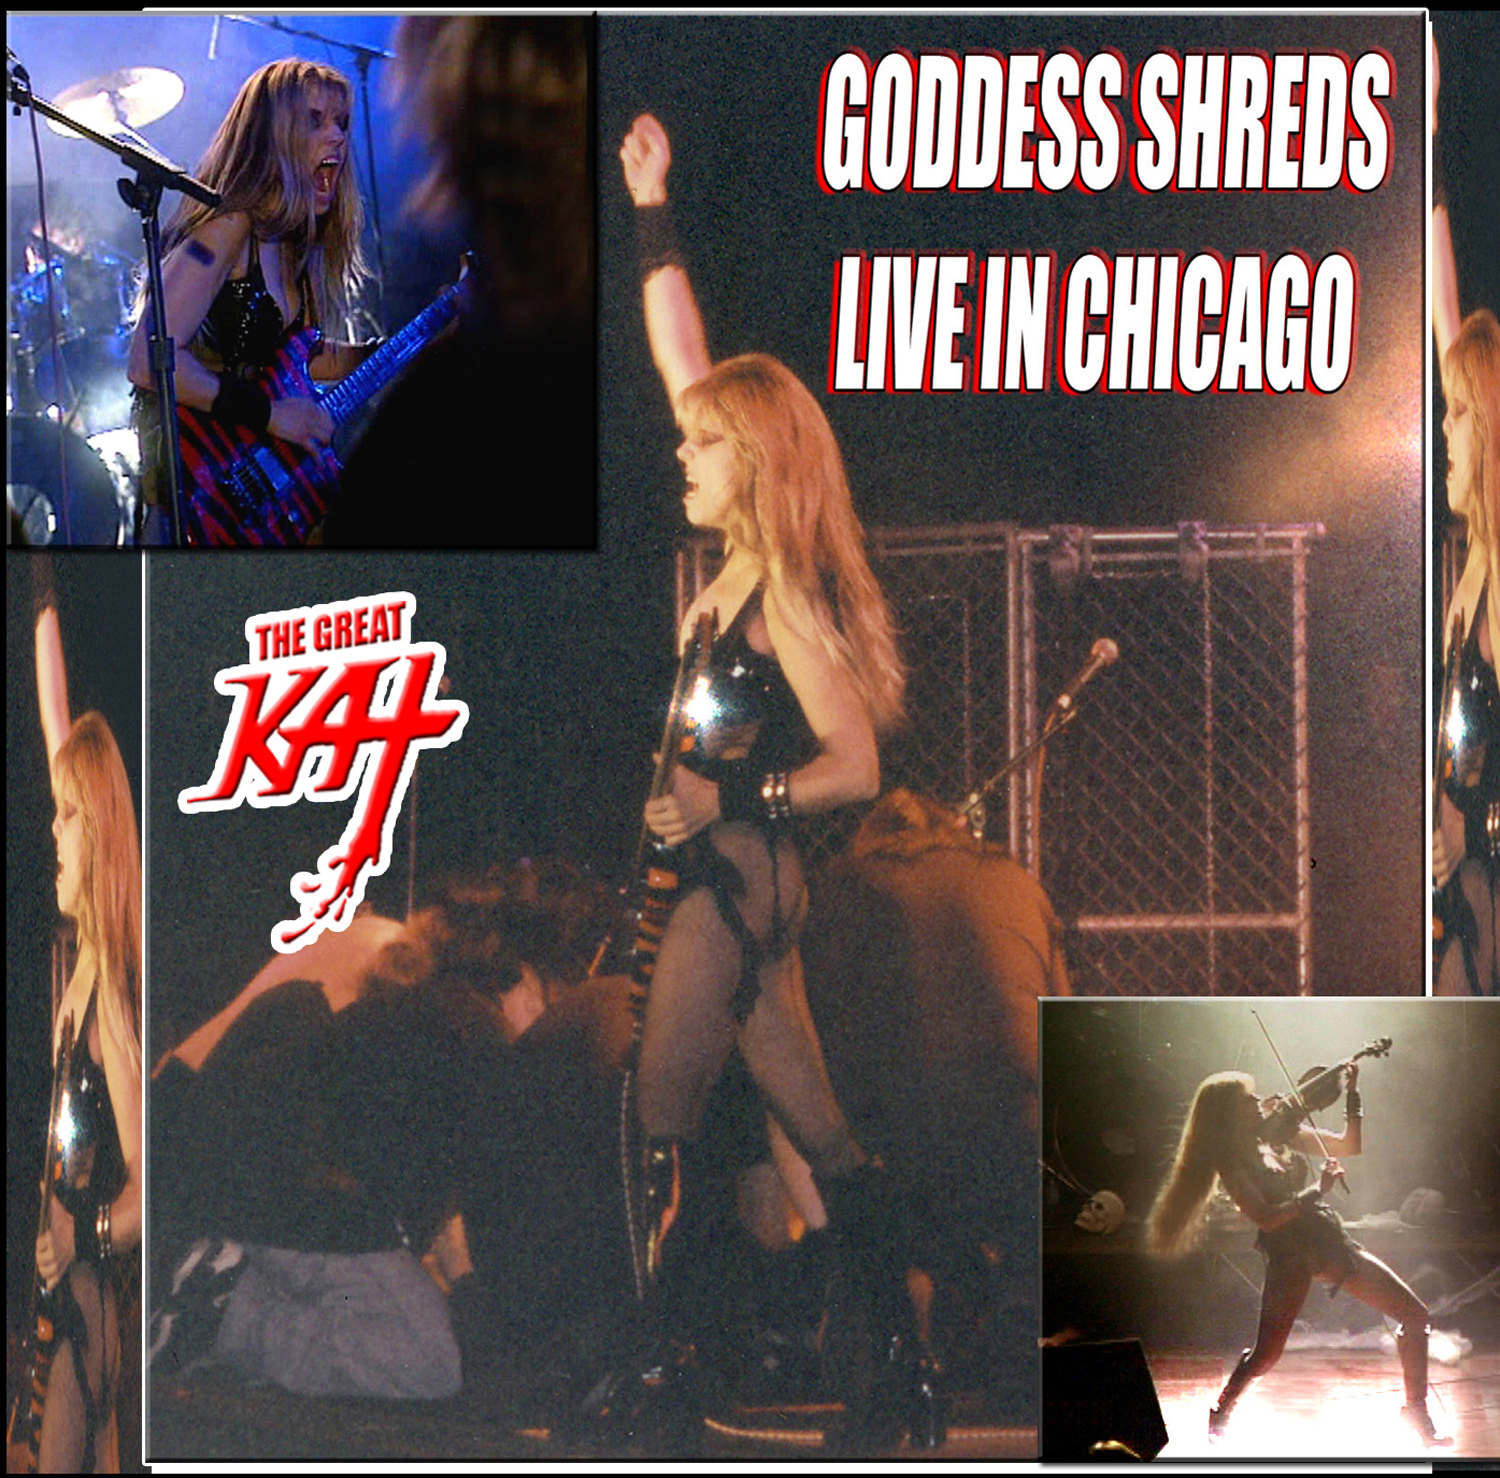 Out Now The Great Kat S New Single Goddess Shreds Live In